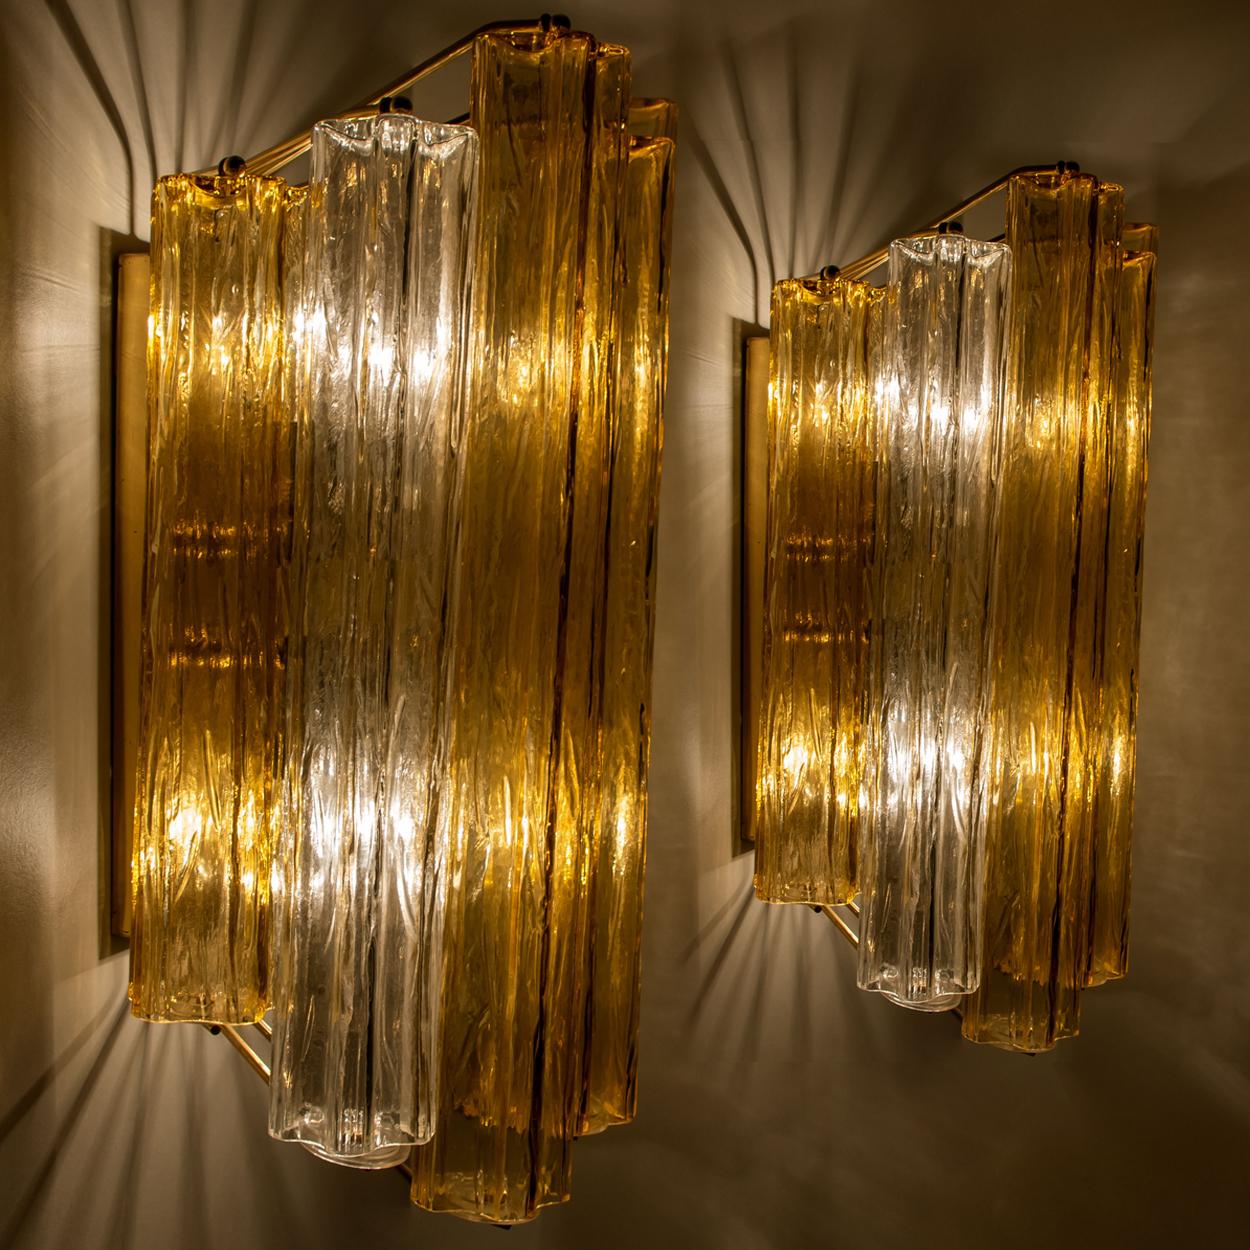 1 of the 4 Extra Large Wall Sconces or Wall Lights Murano Glass, Barovier & Toso 1